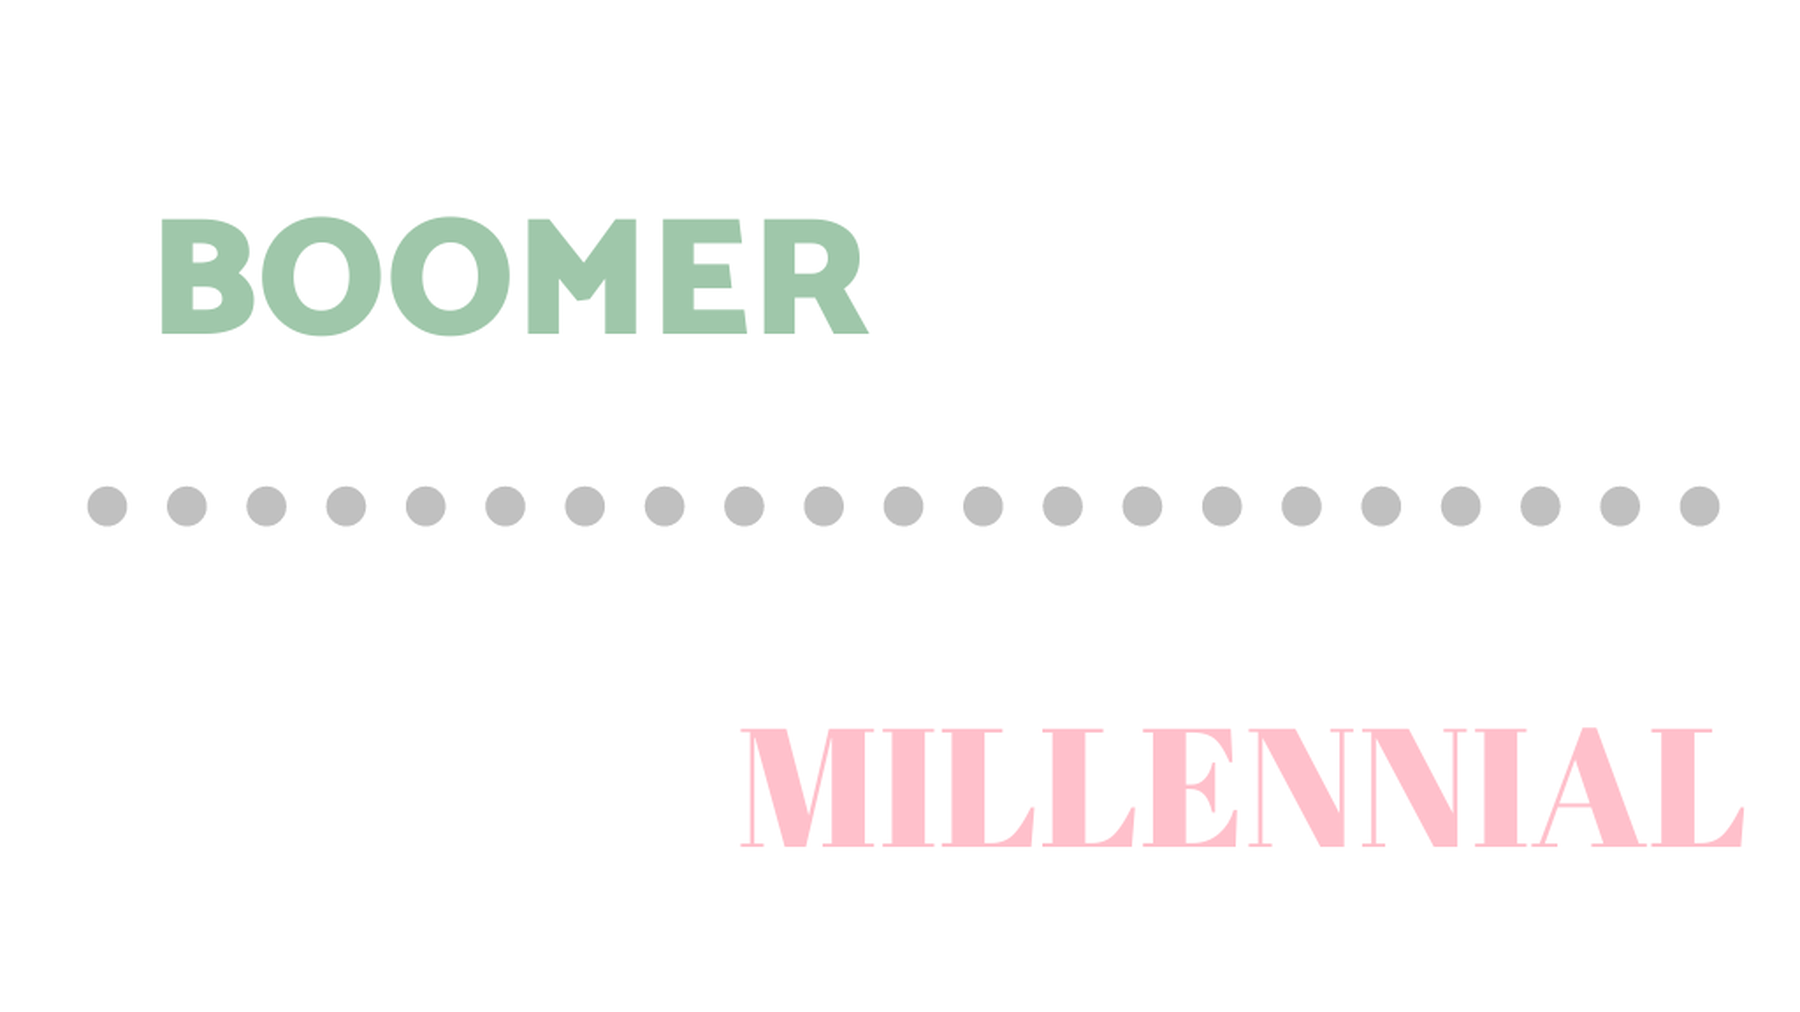 Who has it harder: millennials or boomers? We asked, you answered